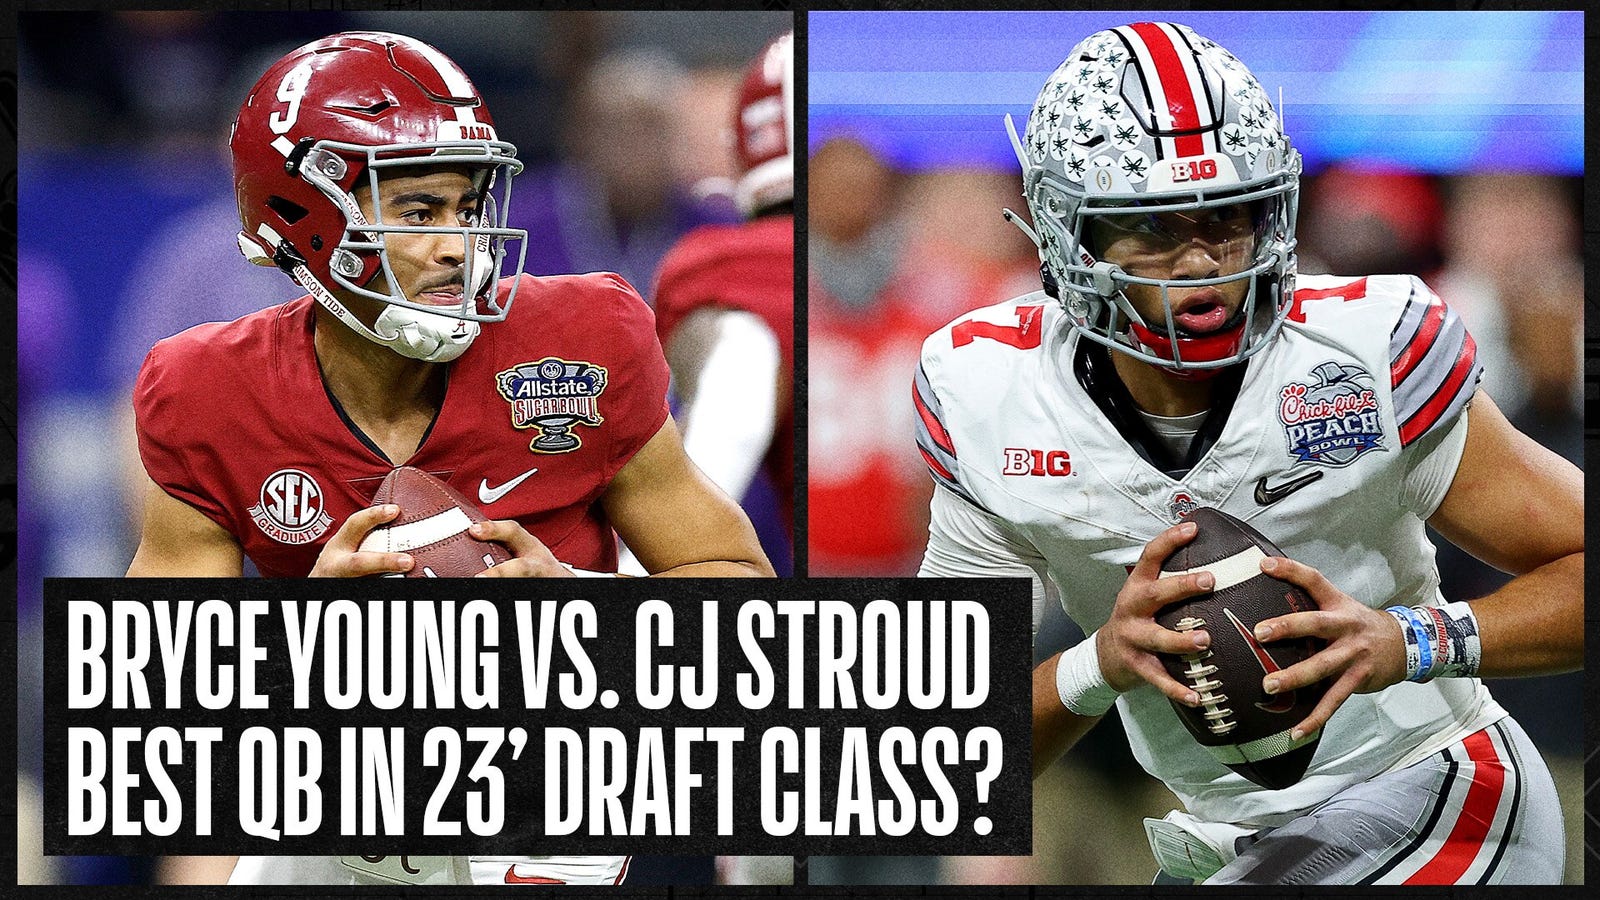 Bryce Young vs C.J. Stroud: Who is the best QB in the NFL Draft 